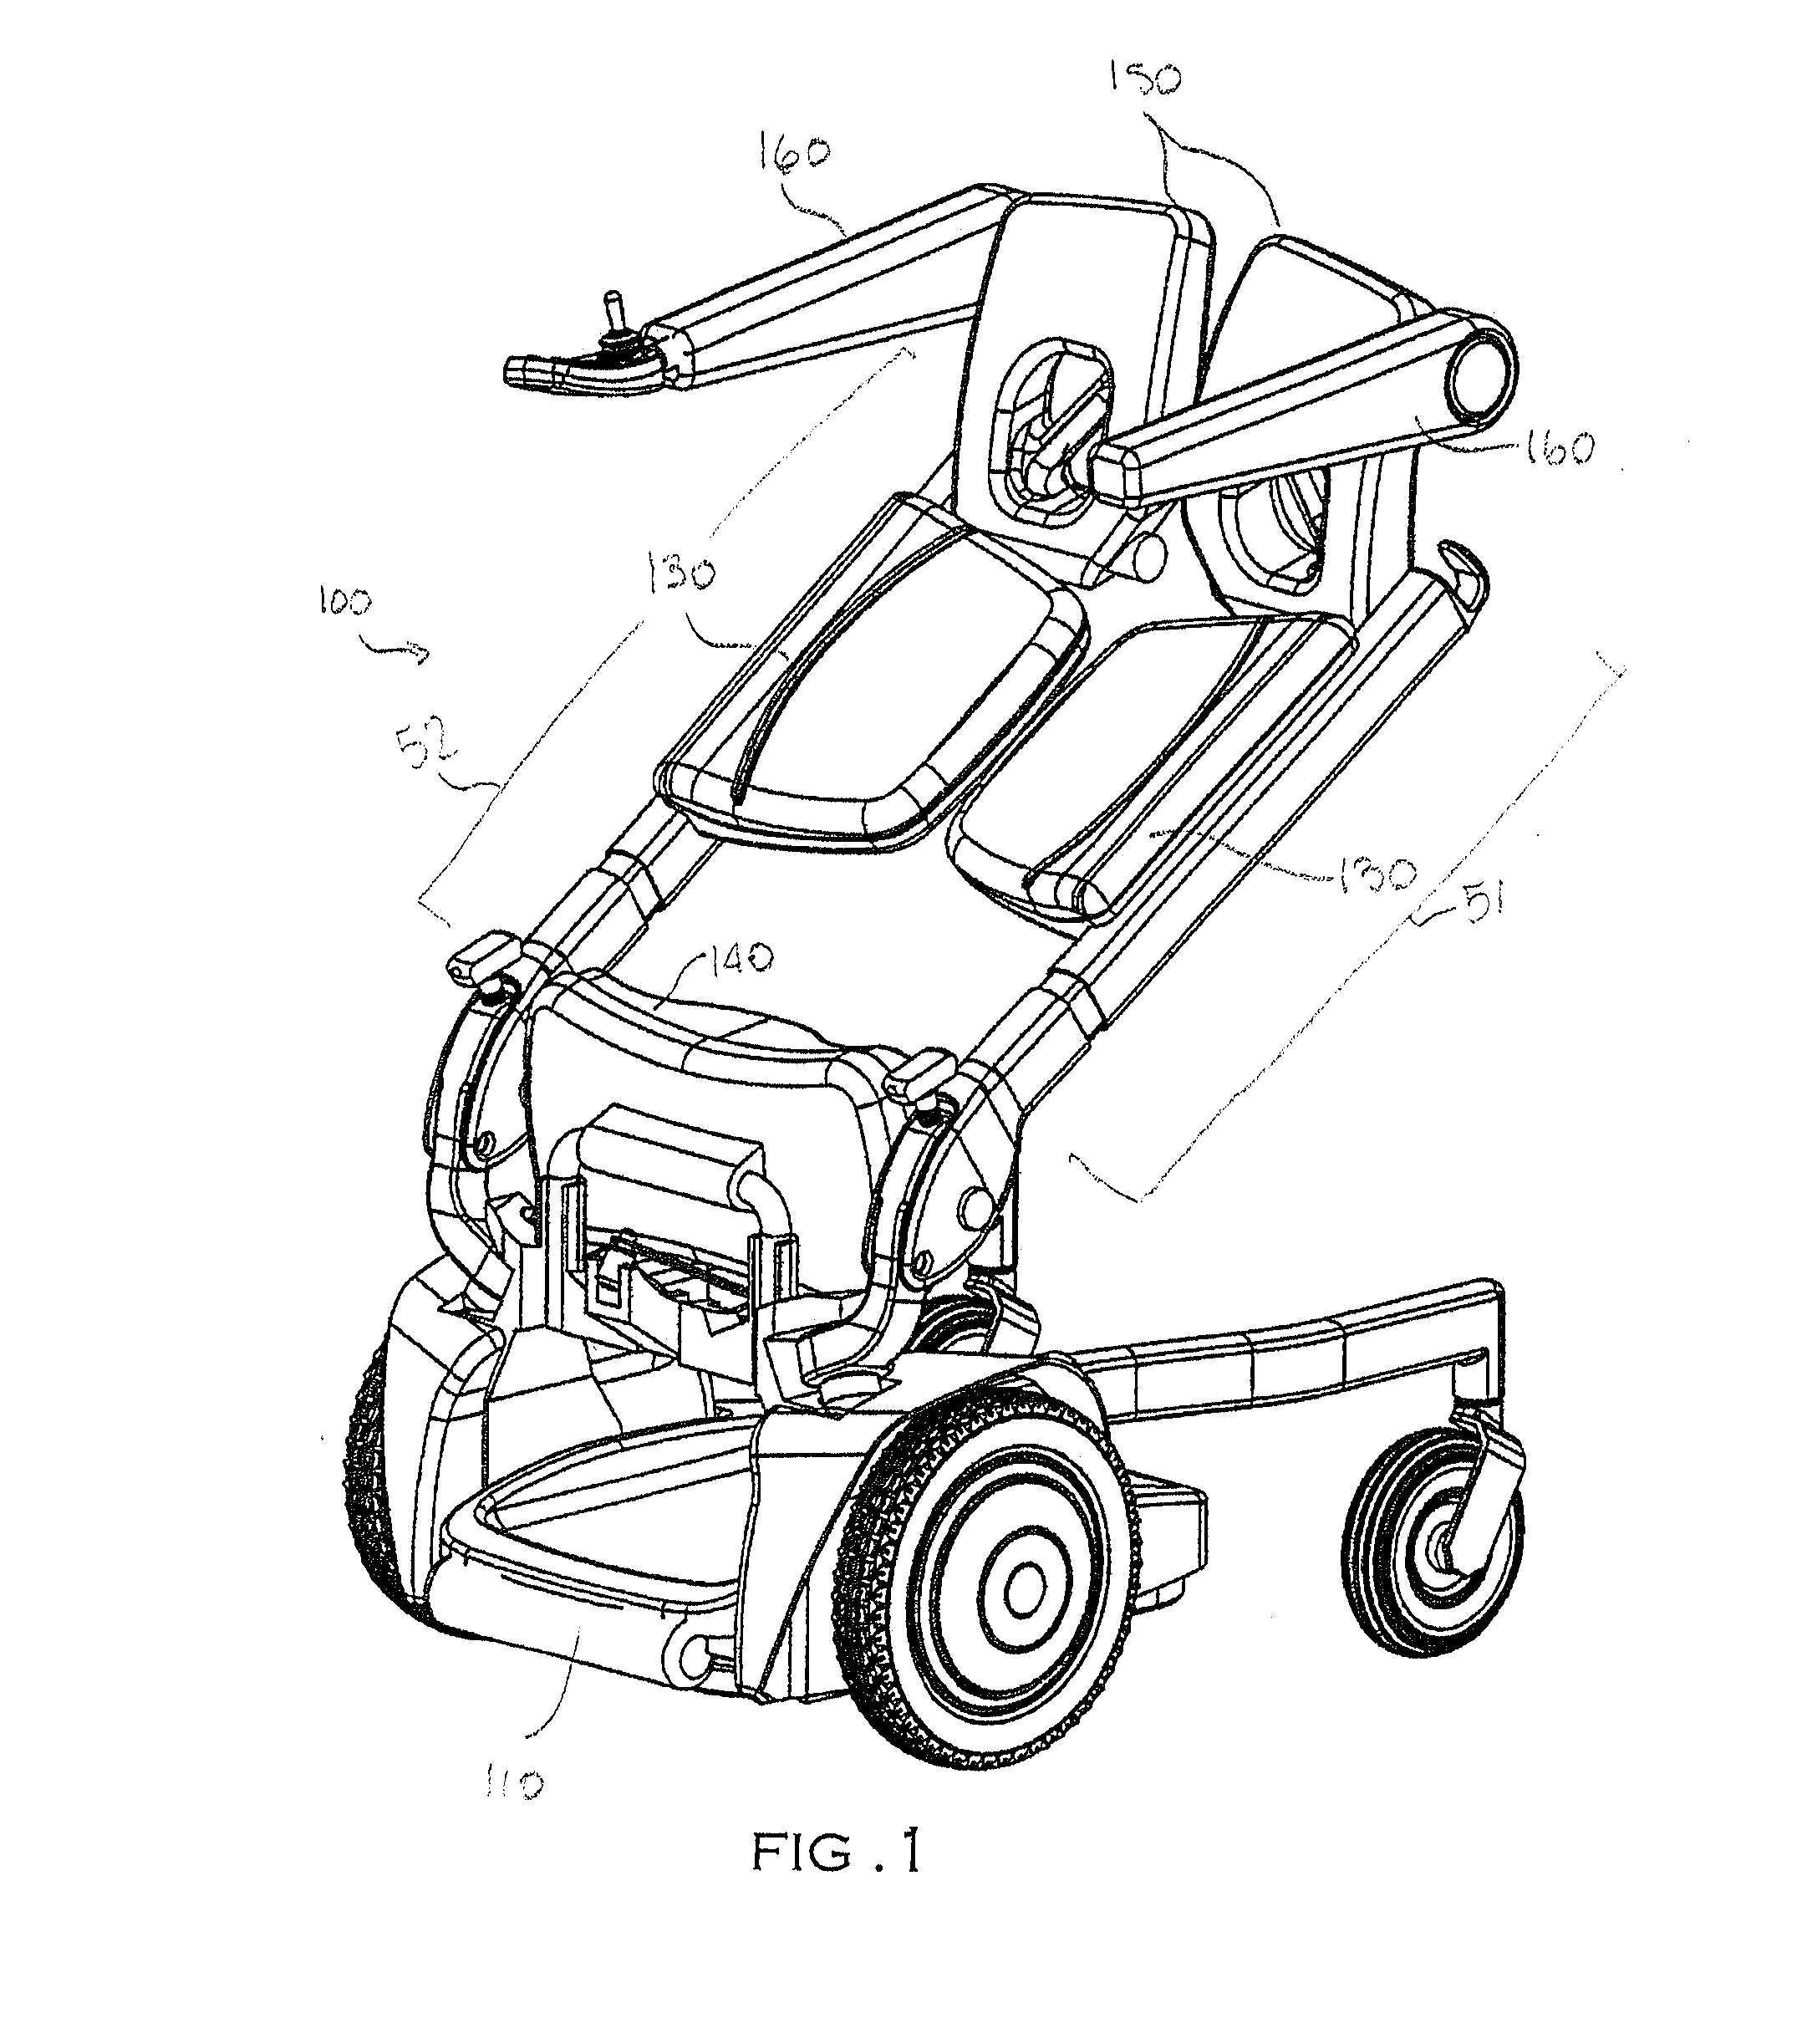 Mobility Device